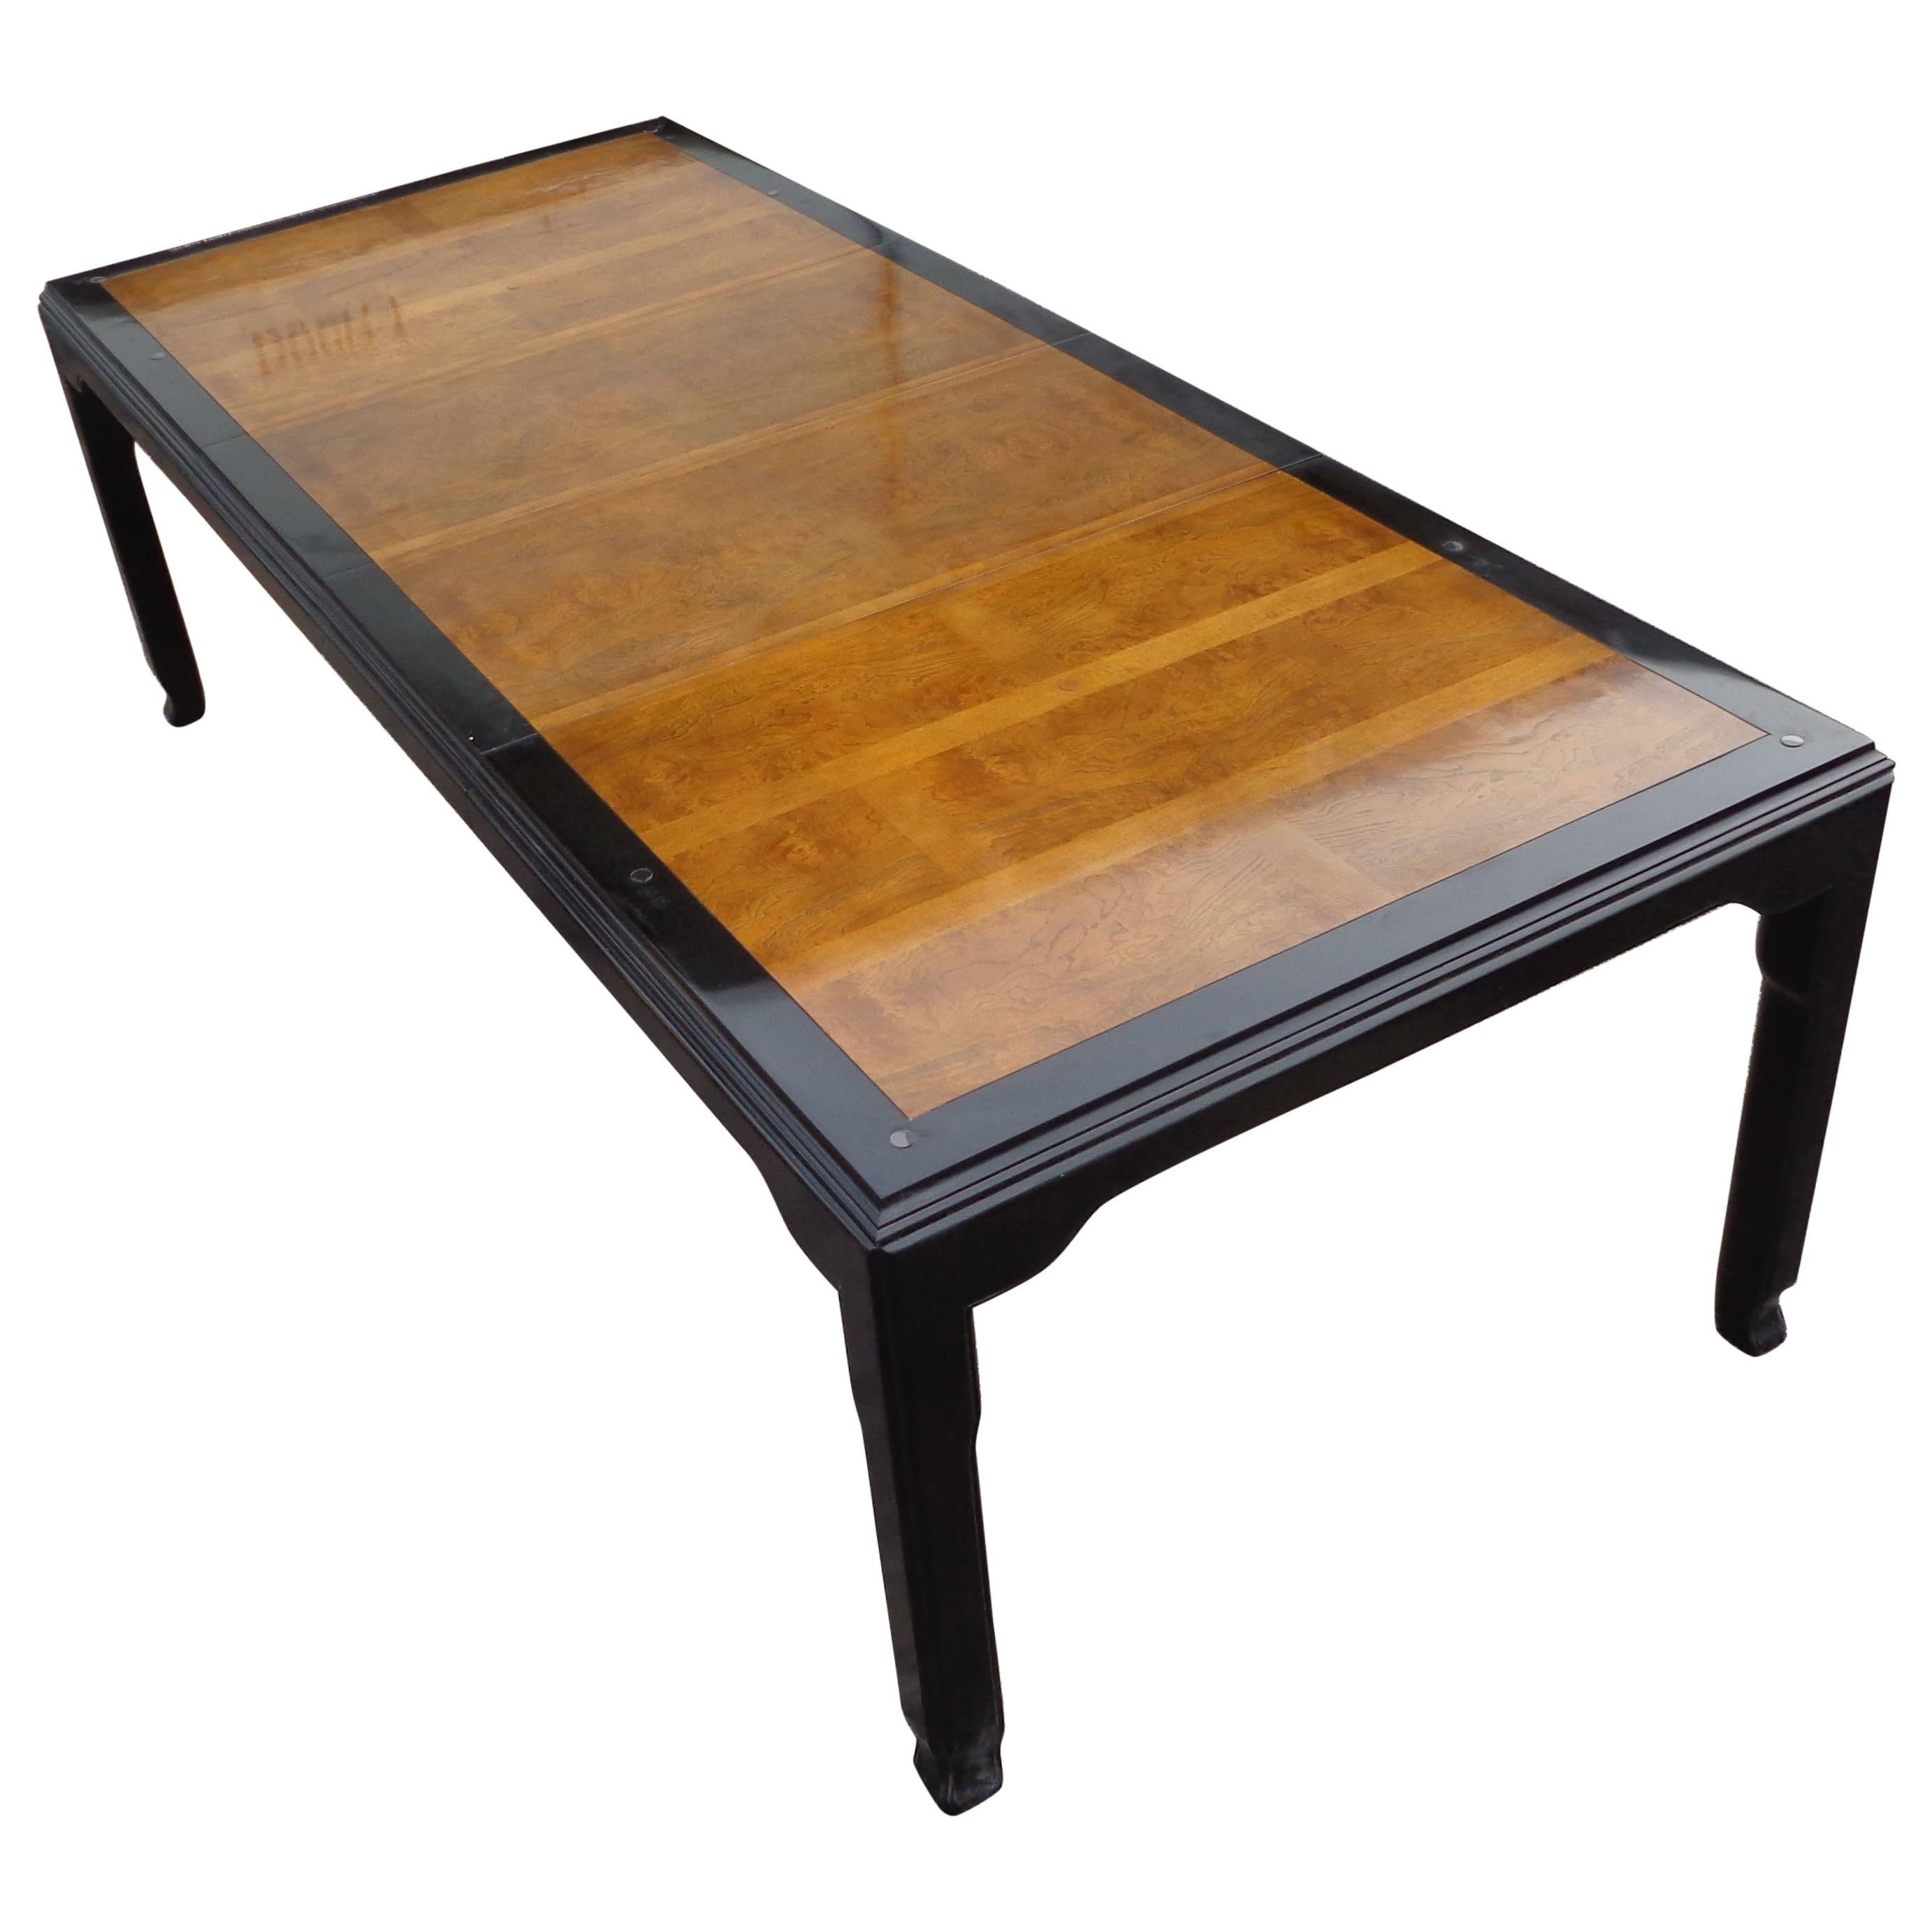 62" Chin Hua Dining Table by Raymond Sobota for Century Furniture